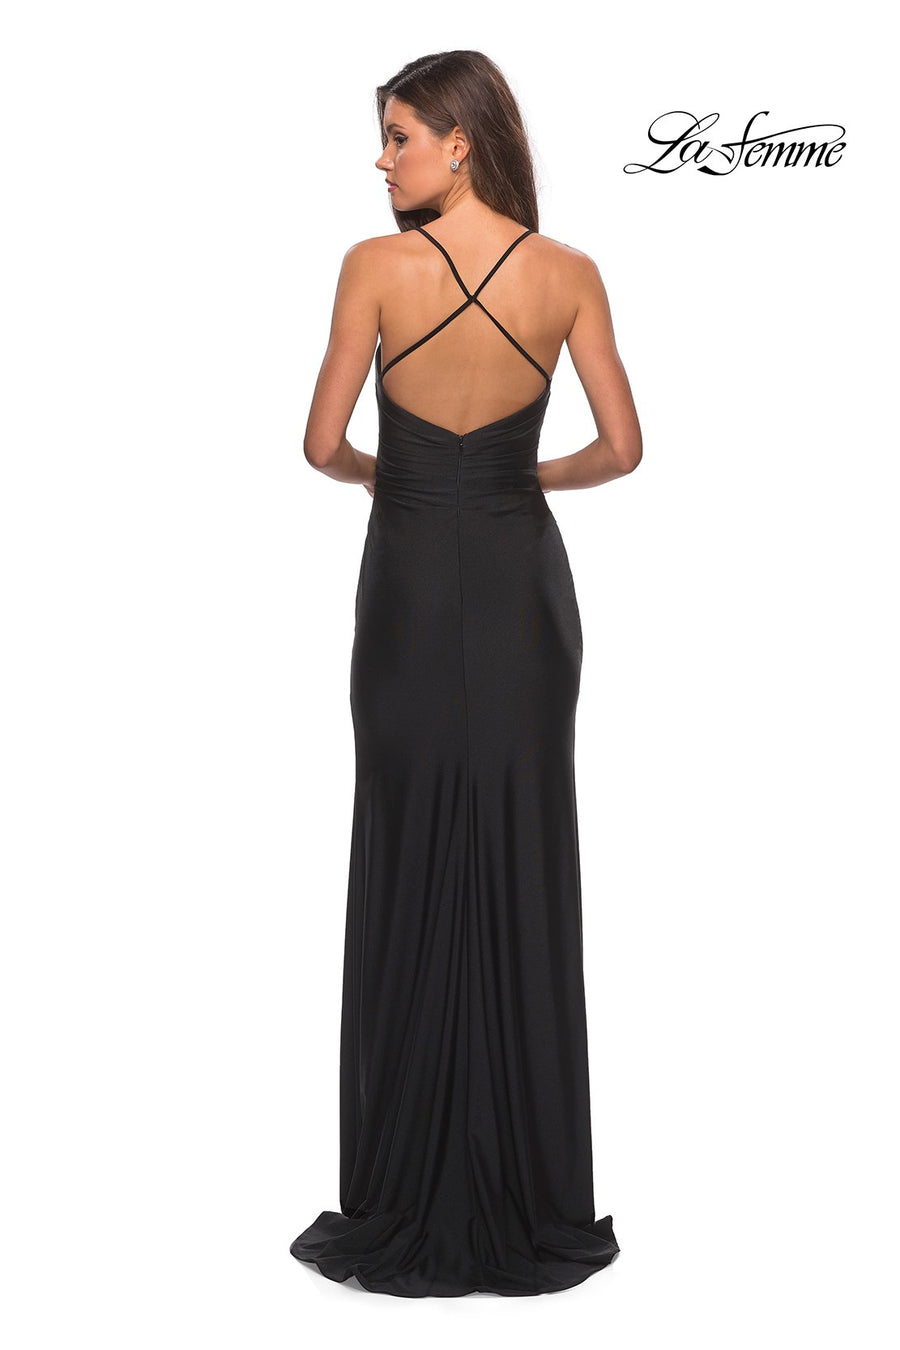 La Femme 28206 prom dress images.  La Femme 28206 is available in these colors: Black, Burgundy, Nude.